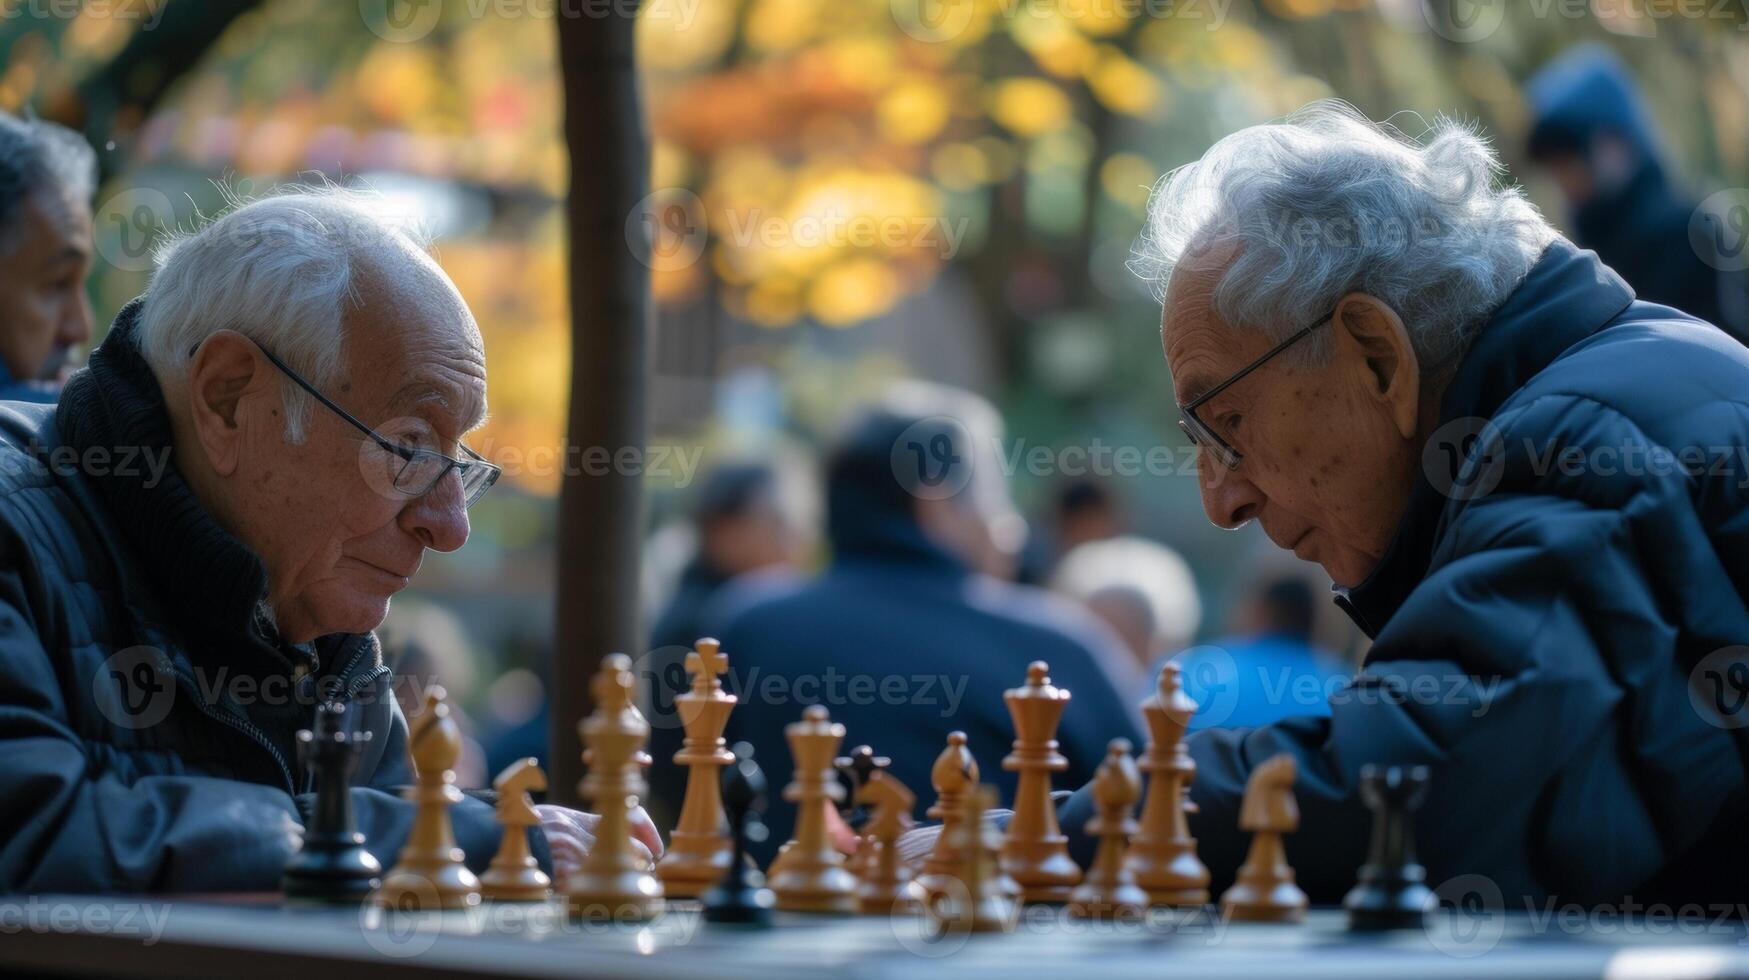 The park is transformed into a battleground of wits and strategy as seniors go headtohead in a chess tournament showcasing their sharp minds and unwavering determination photo